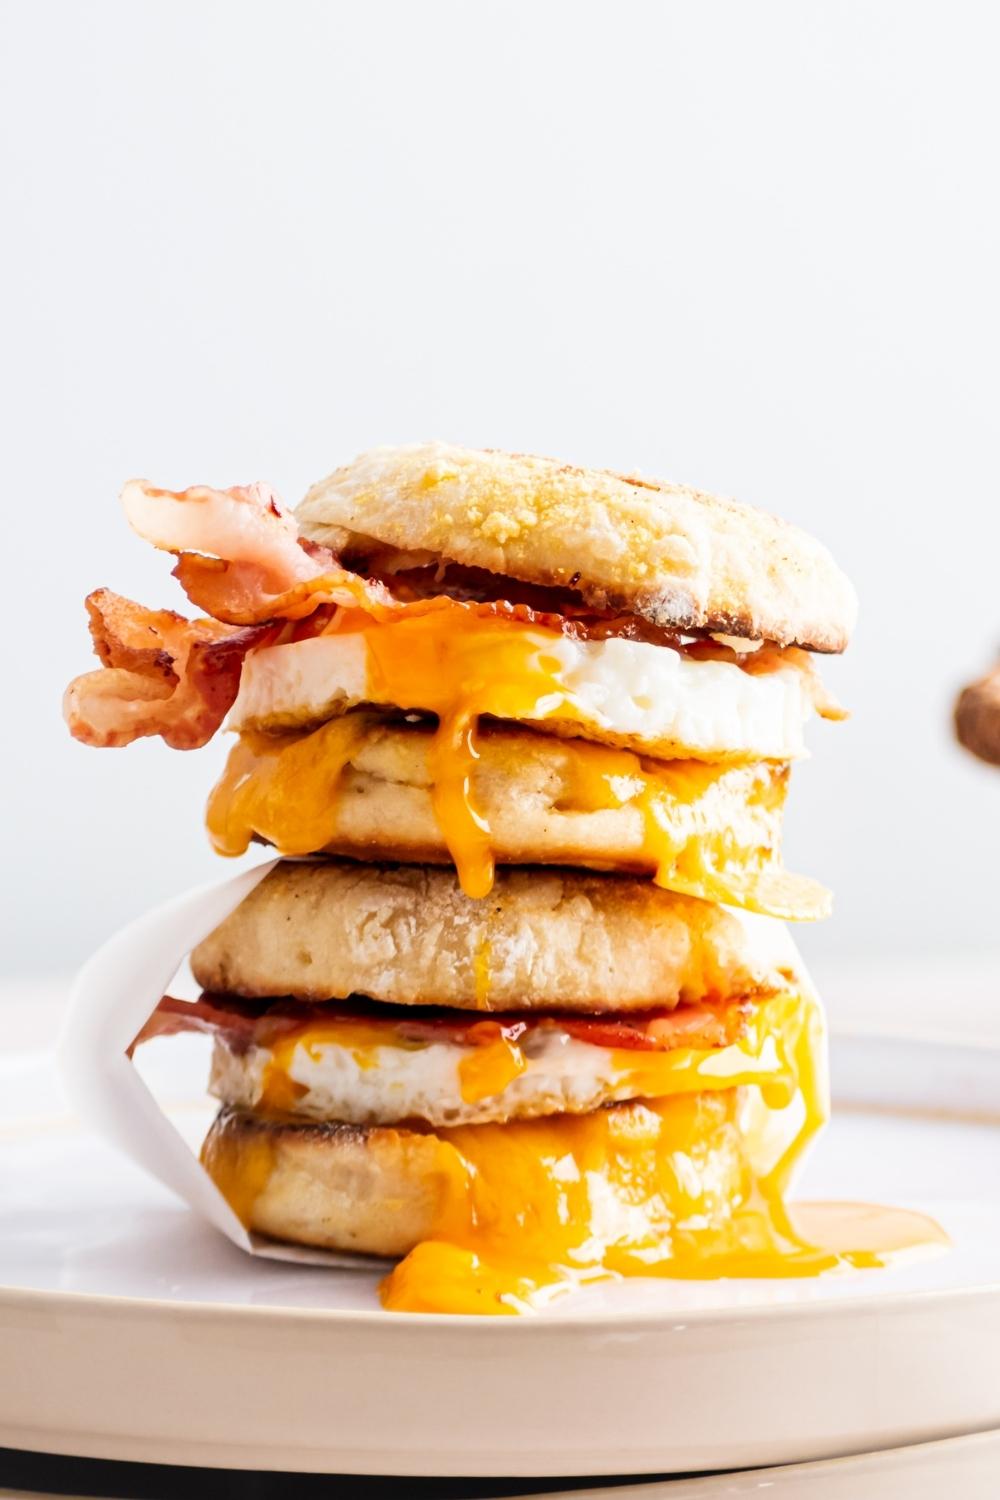 An english muffin with canadian bacon, an egg, and cheese between another english muffin. It is on top of the same breakfast sandwich on a plate.